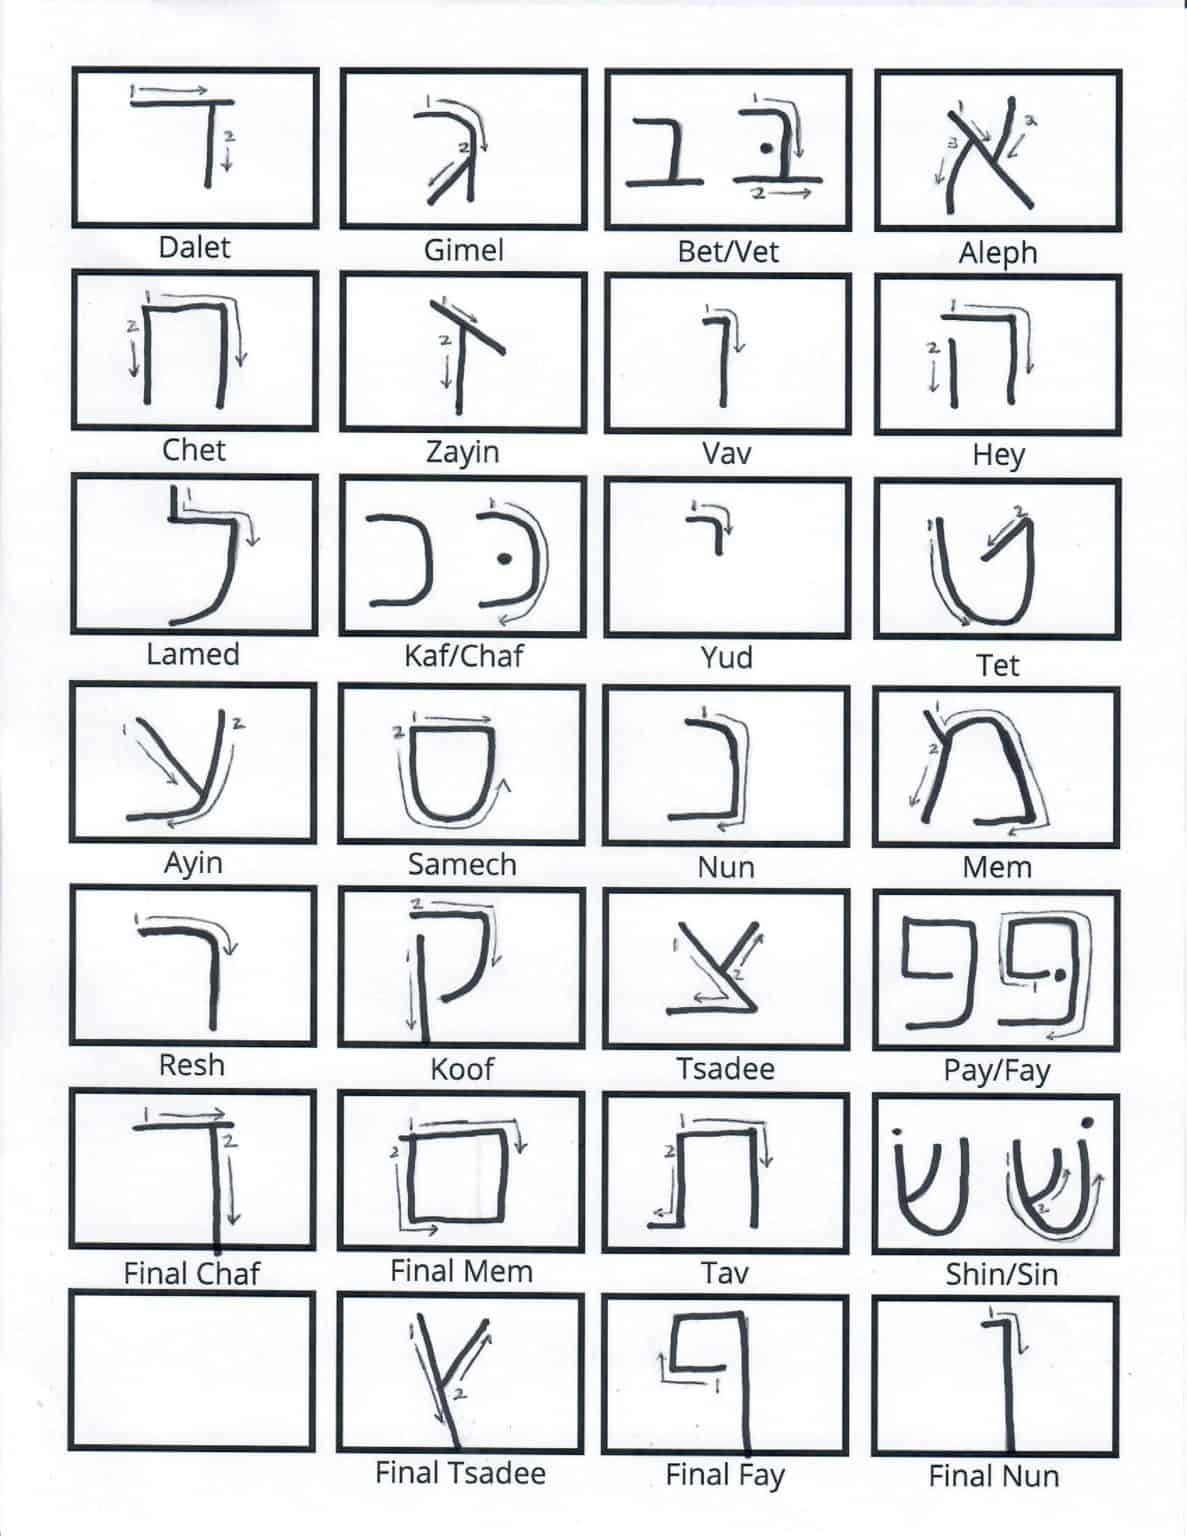 copy hebrew letters